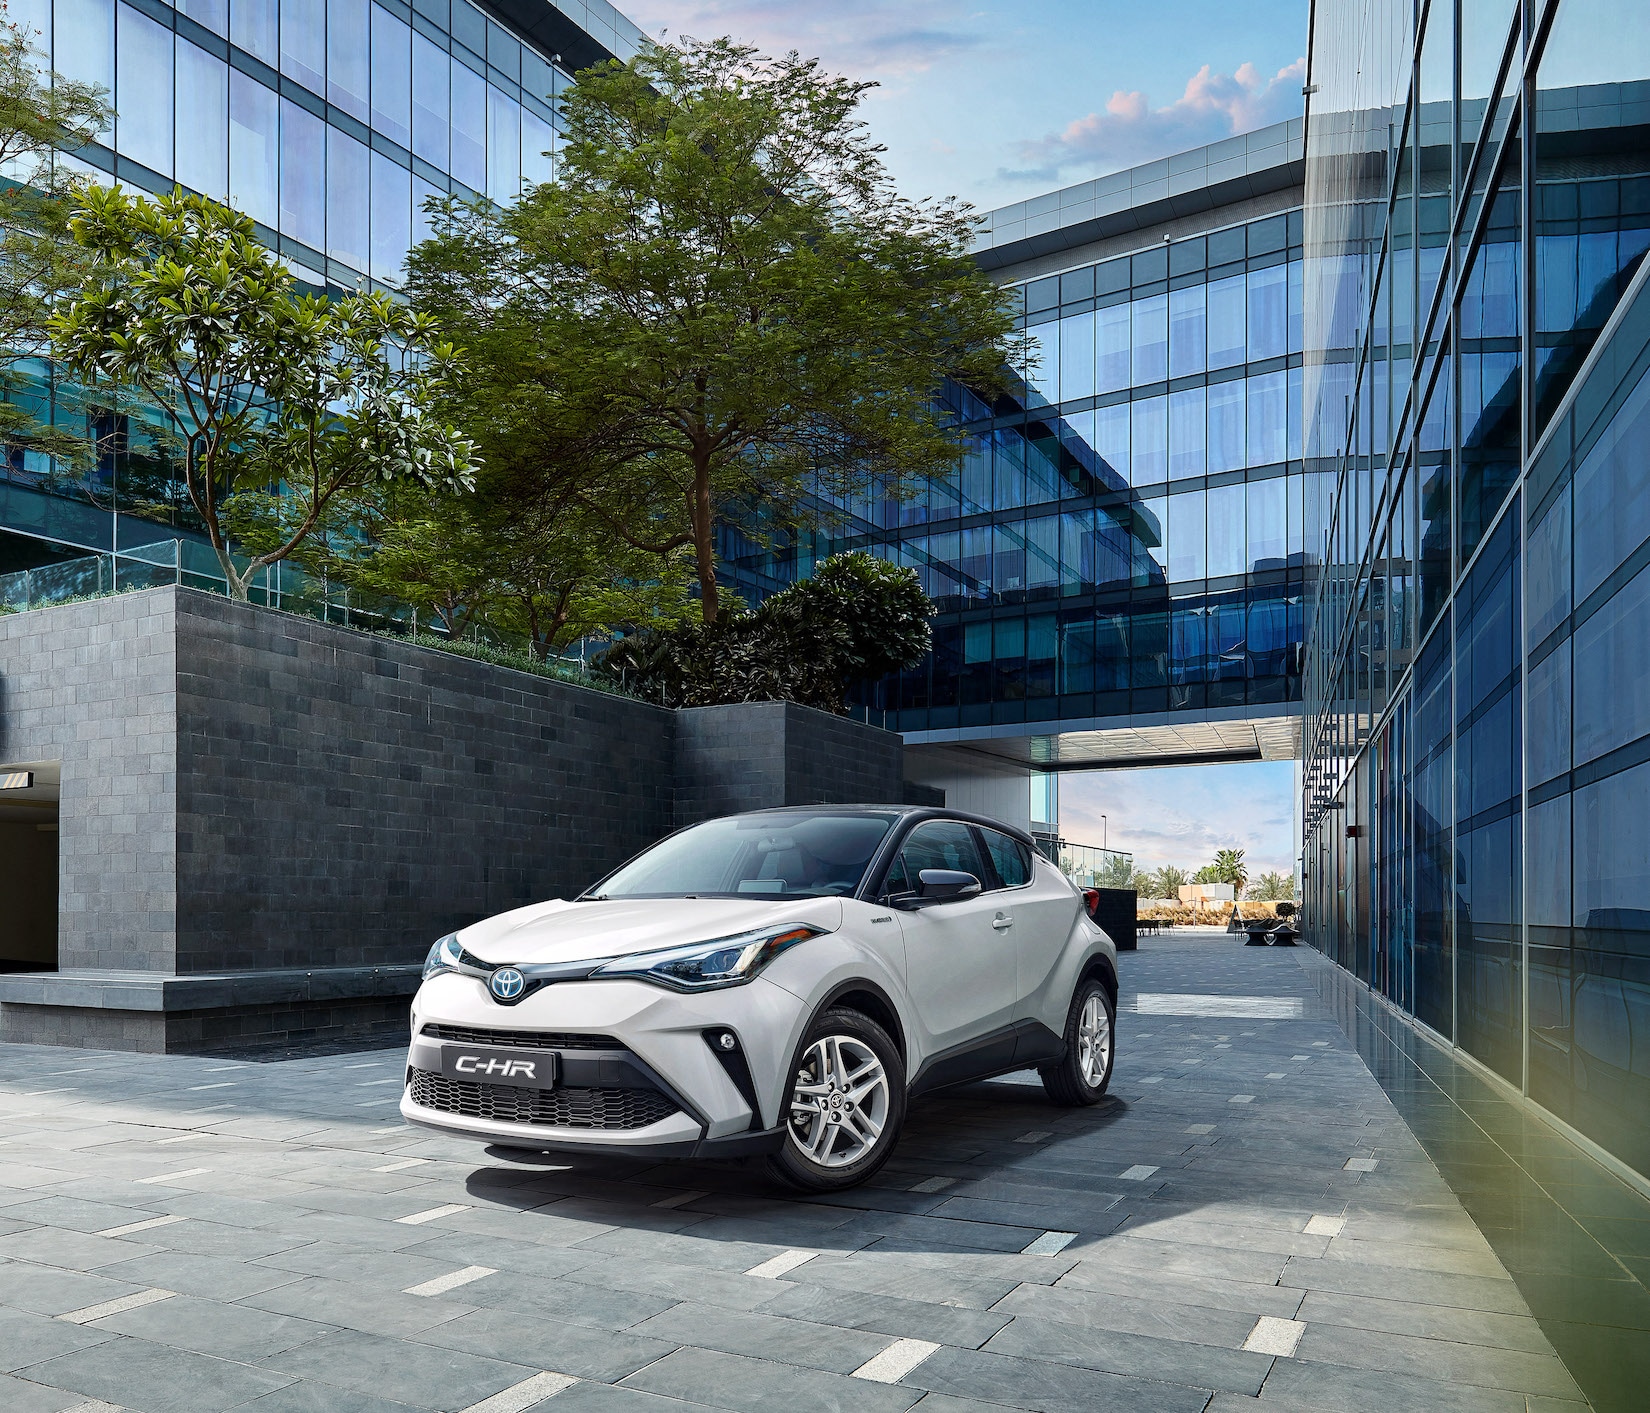 Why choose a Toyota?